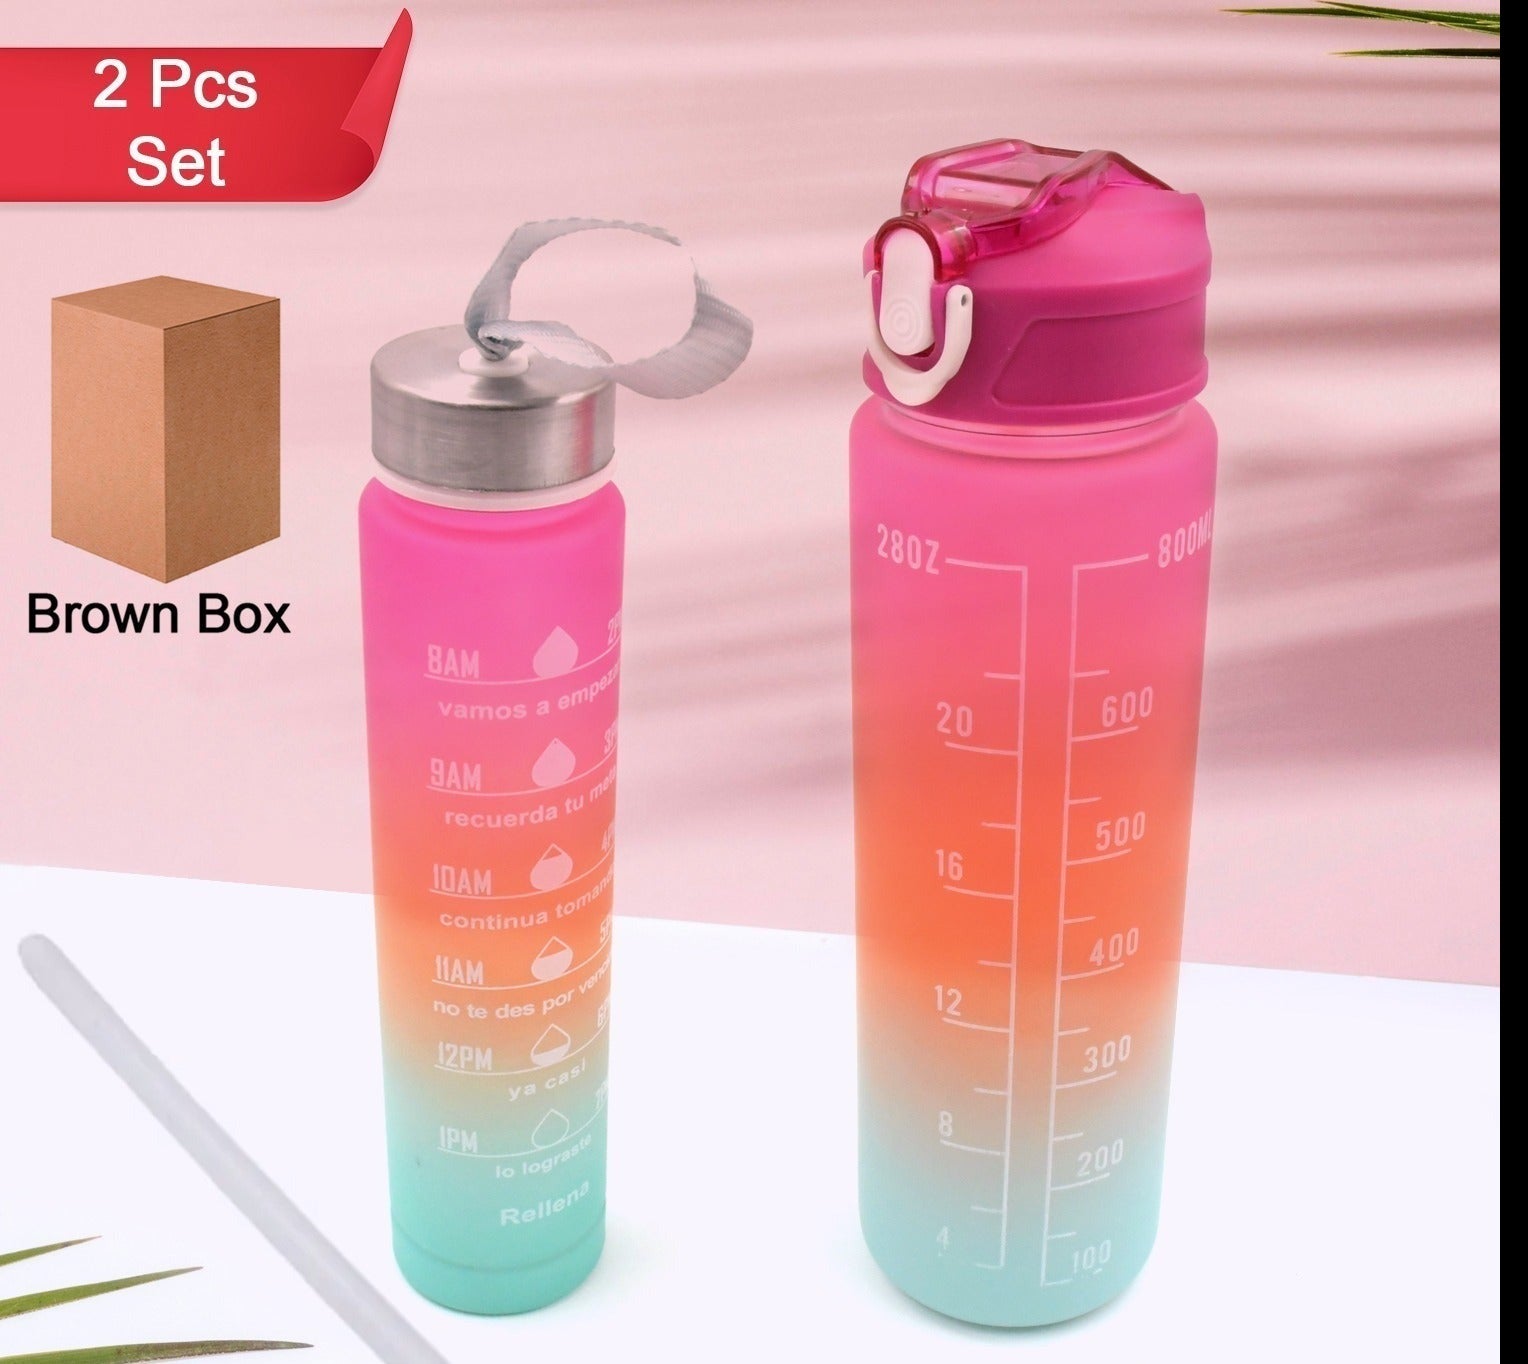 Kid-Friendly Cartoon Water Bottles (2 Pcs), High-Quality, BPA-Free, Leak-Proof. Perfect for School, Office, Sports, Gym, Yoga, and Fridge